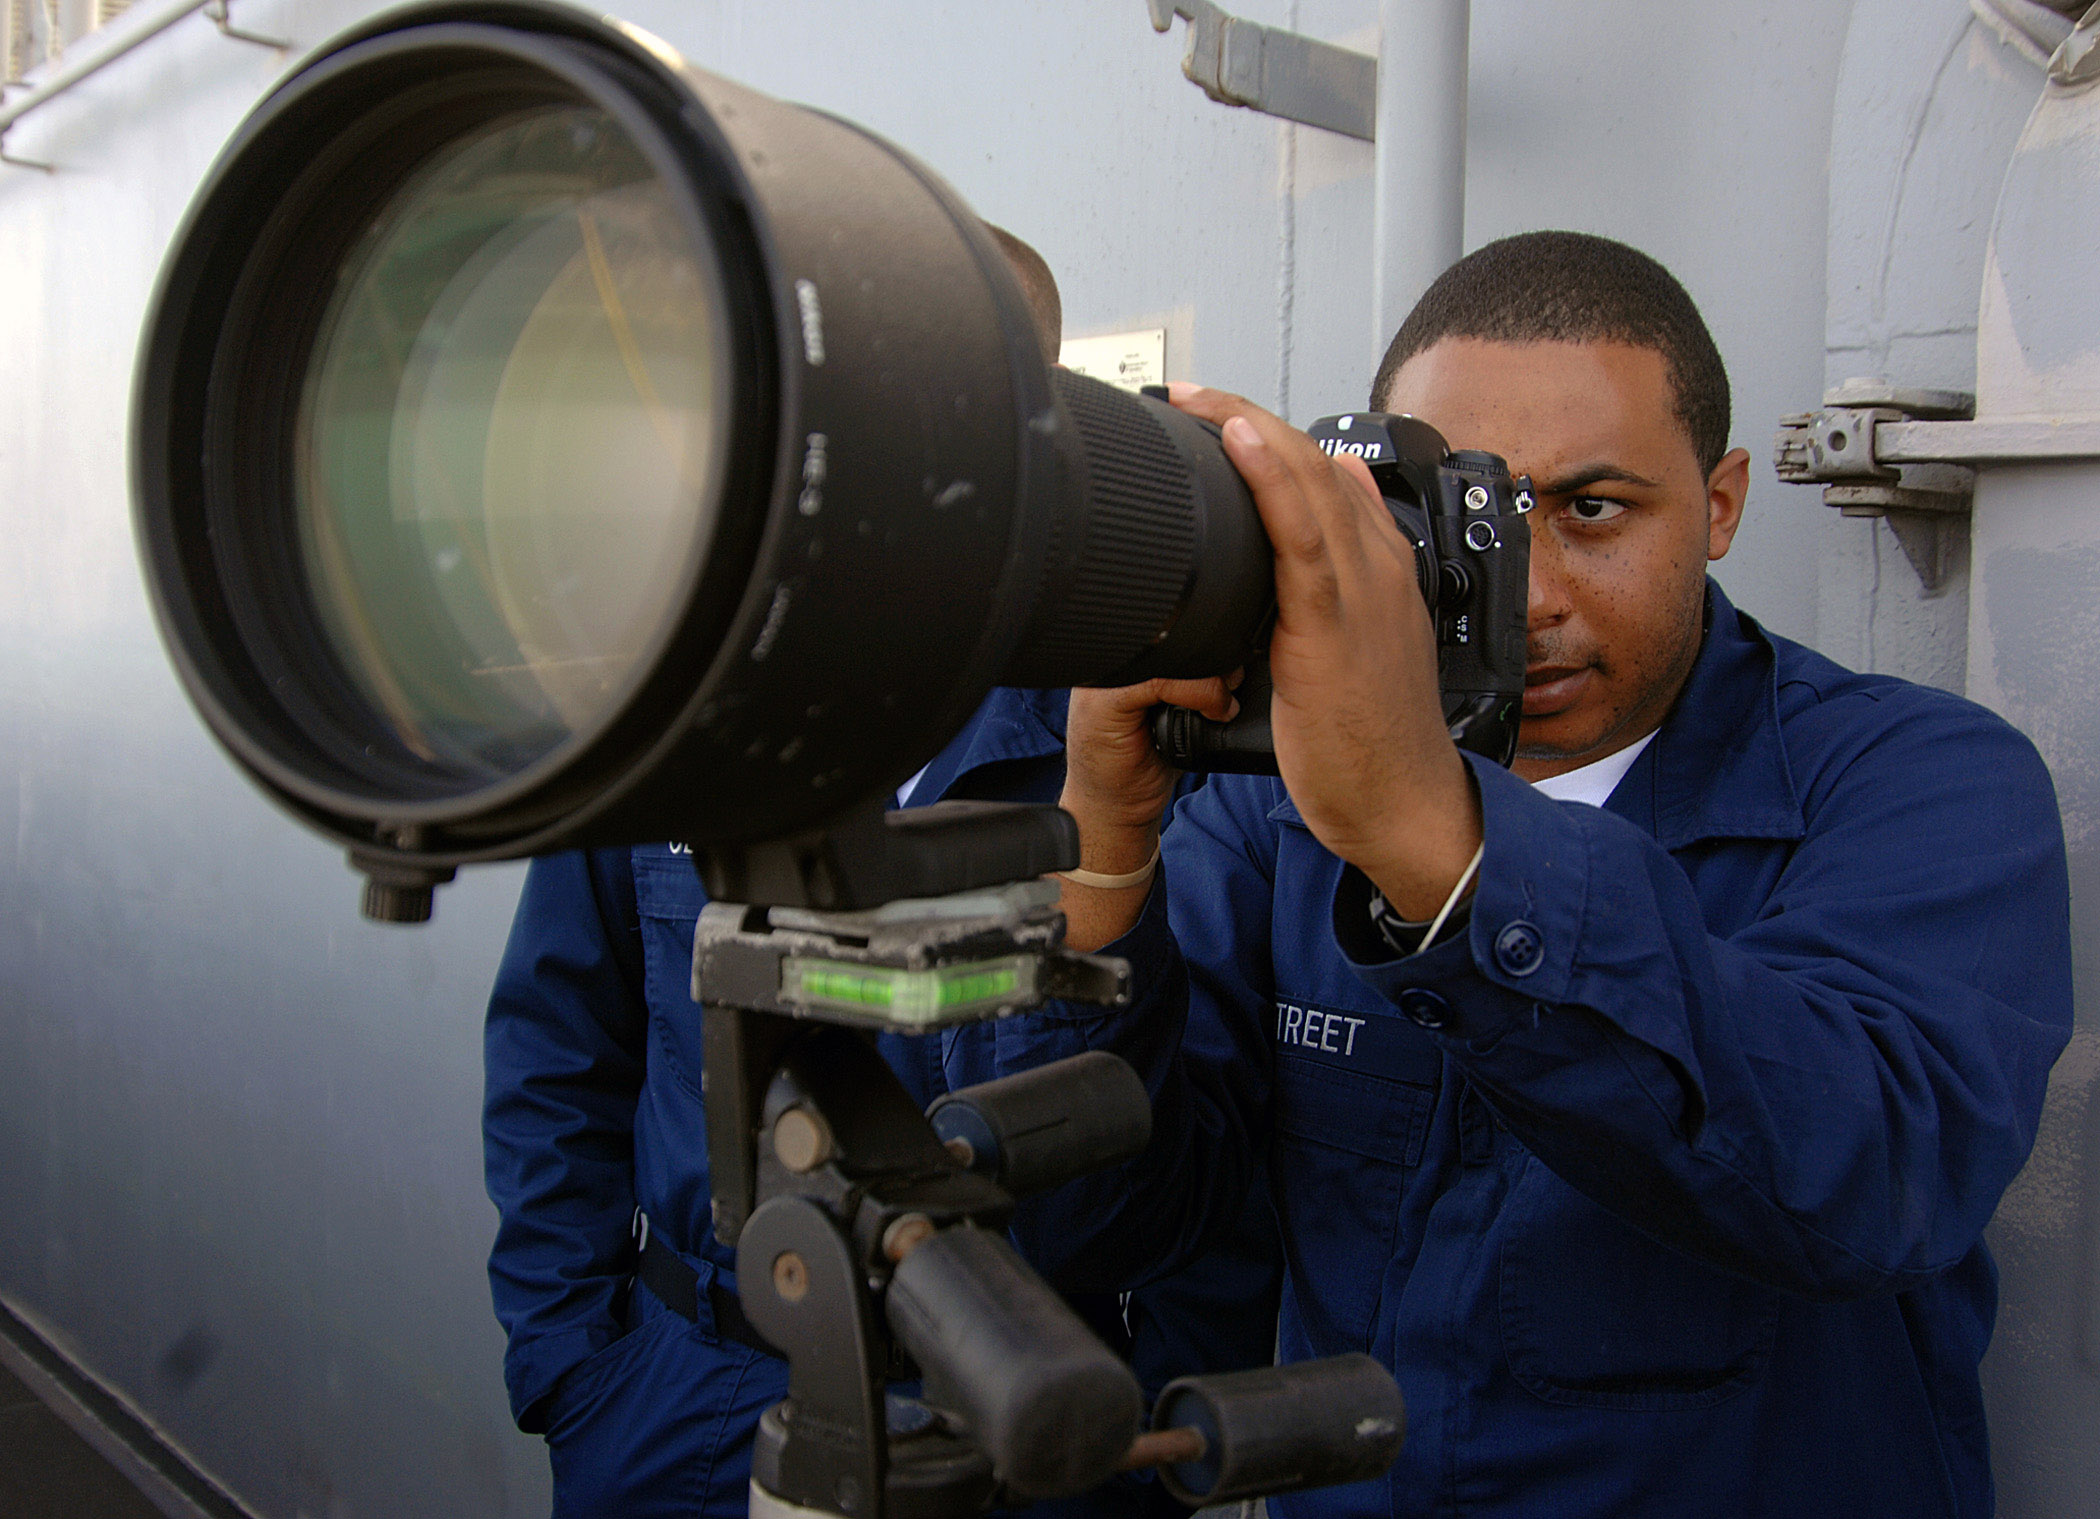 US Navy 071210-N-8923M-048 Mass Communication Specialist Seaman Daron Street takes a photo from Vulture's Row